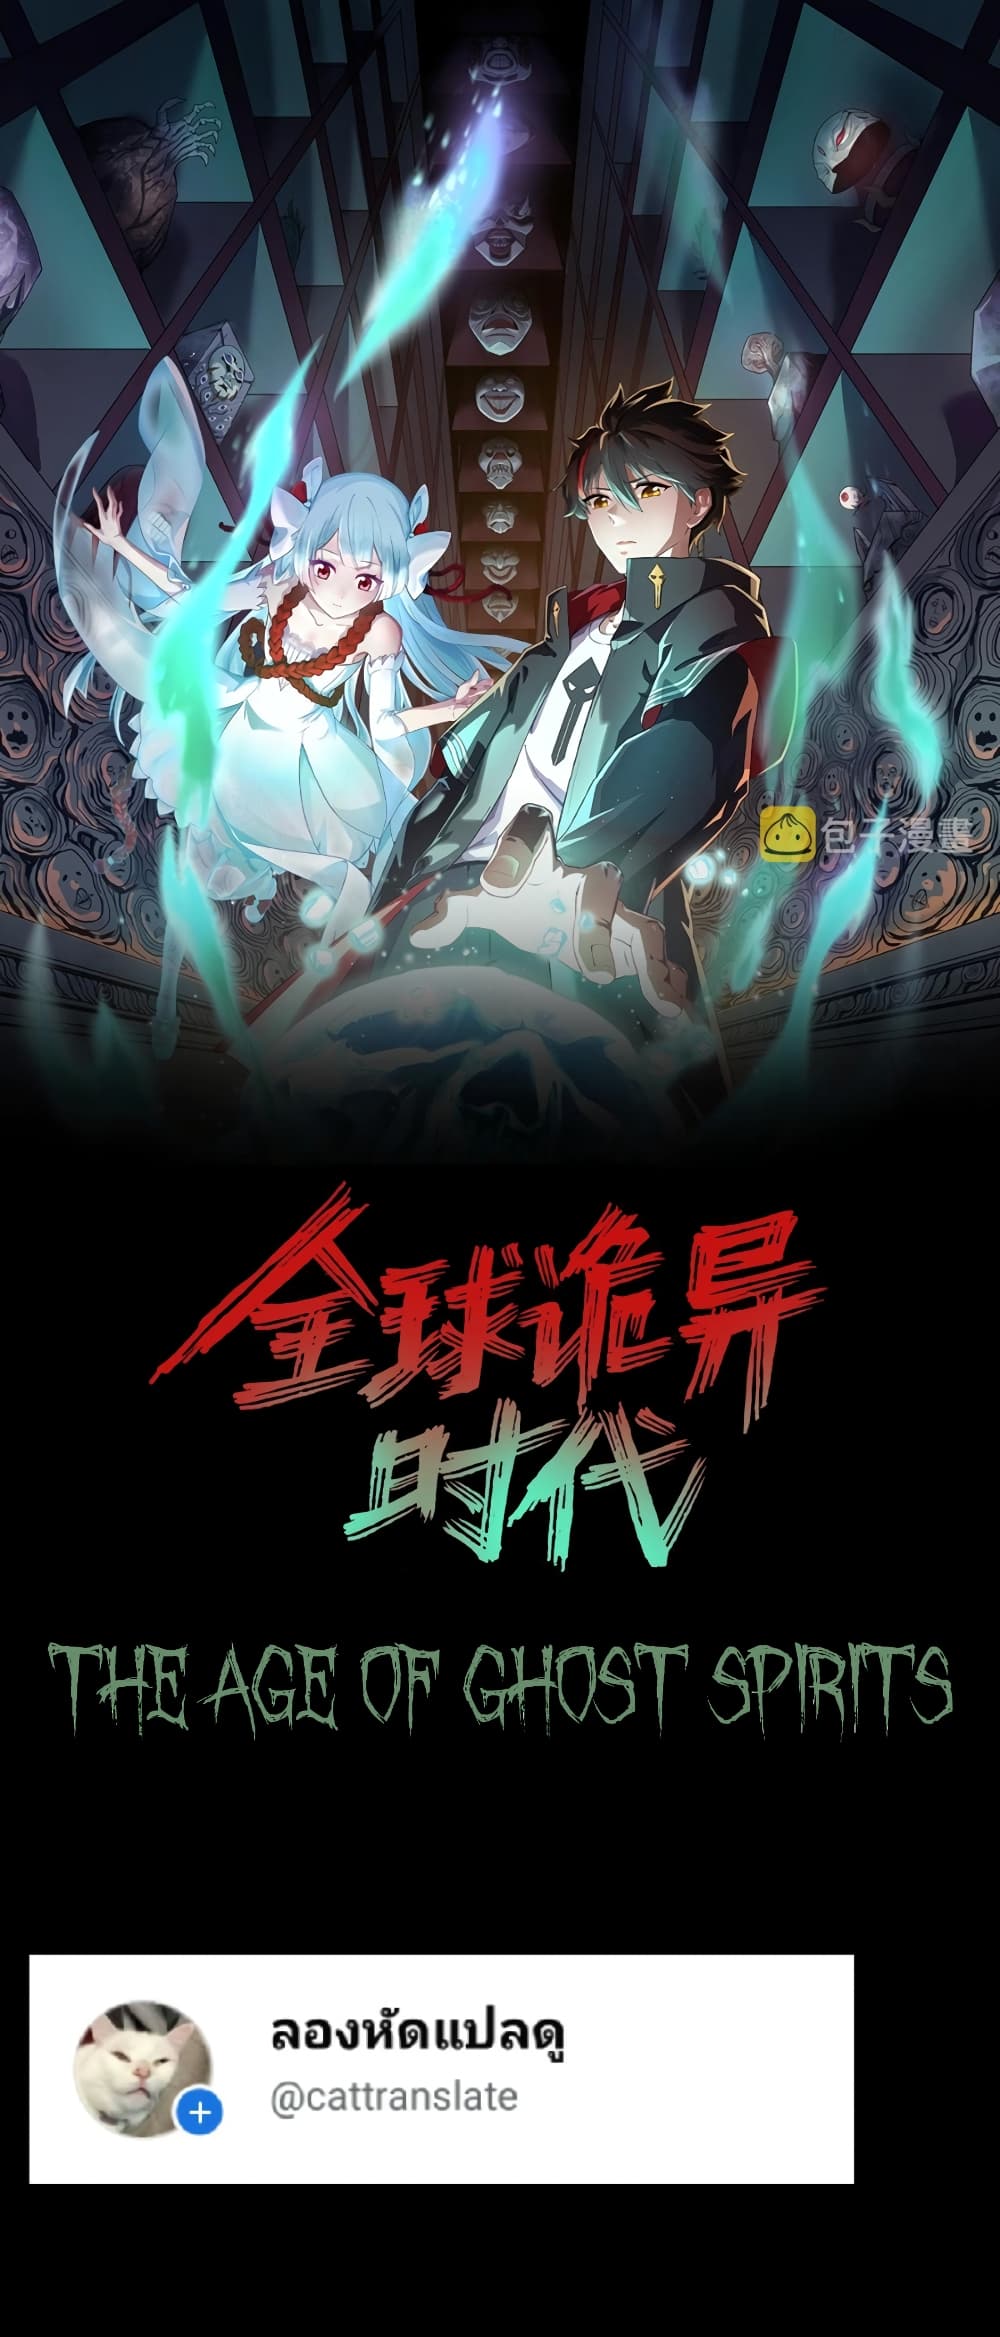 The Age of Ghost Spirits à¸à¸­à¸à¸à¸µà¹ 31 (1)